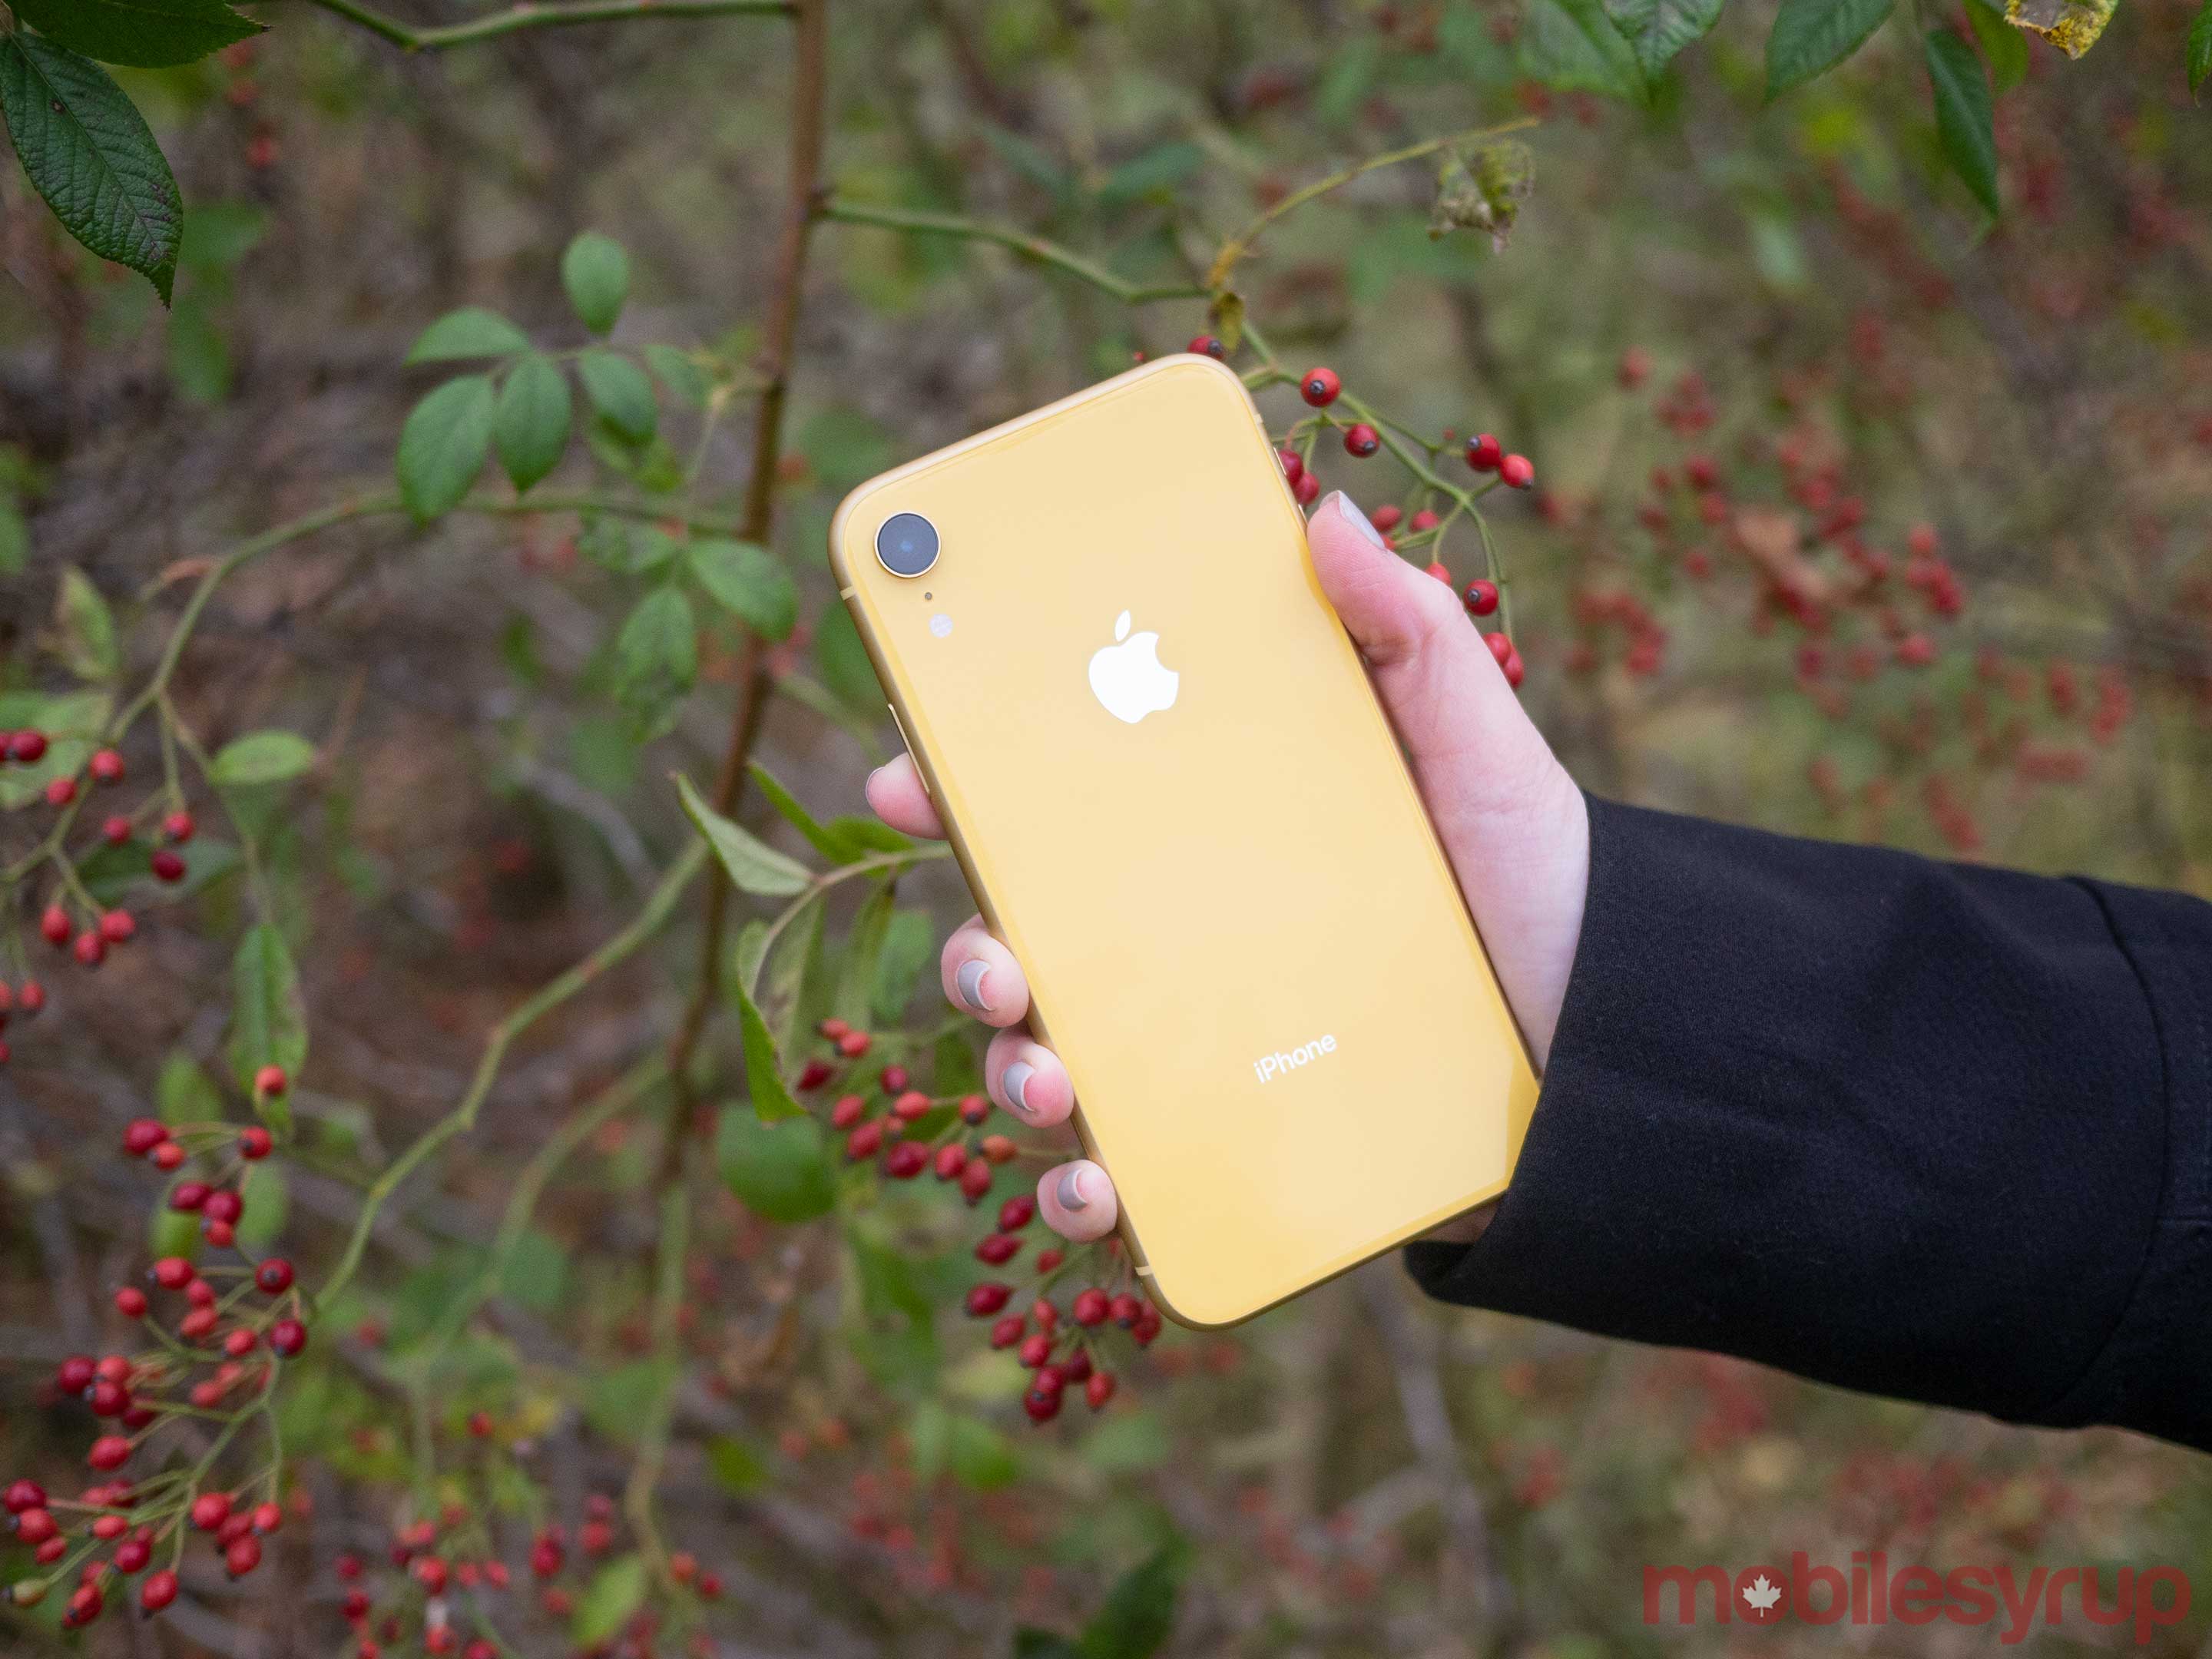 iPhone XR Review: Best iPhone for the average Apple user